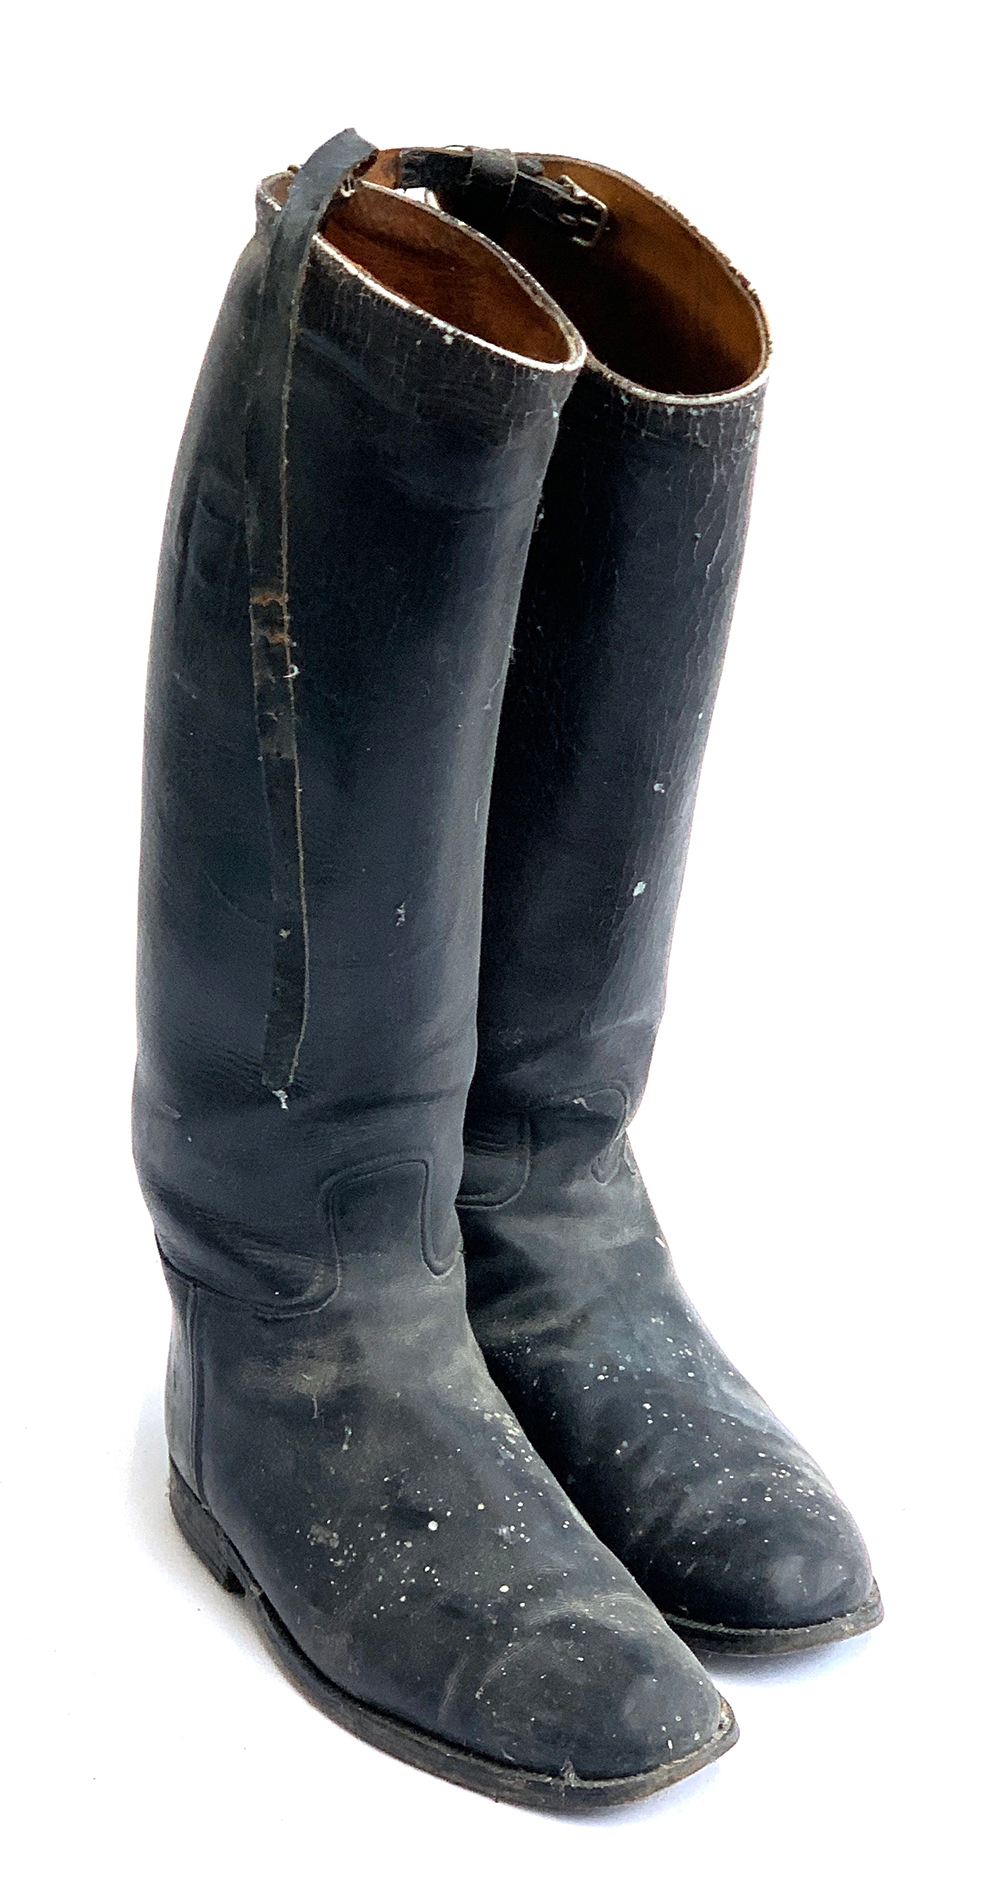 A pair of ladies black leather hunting boots